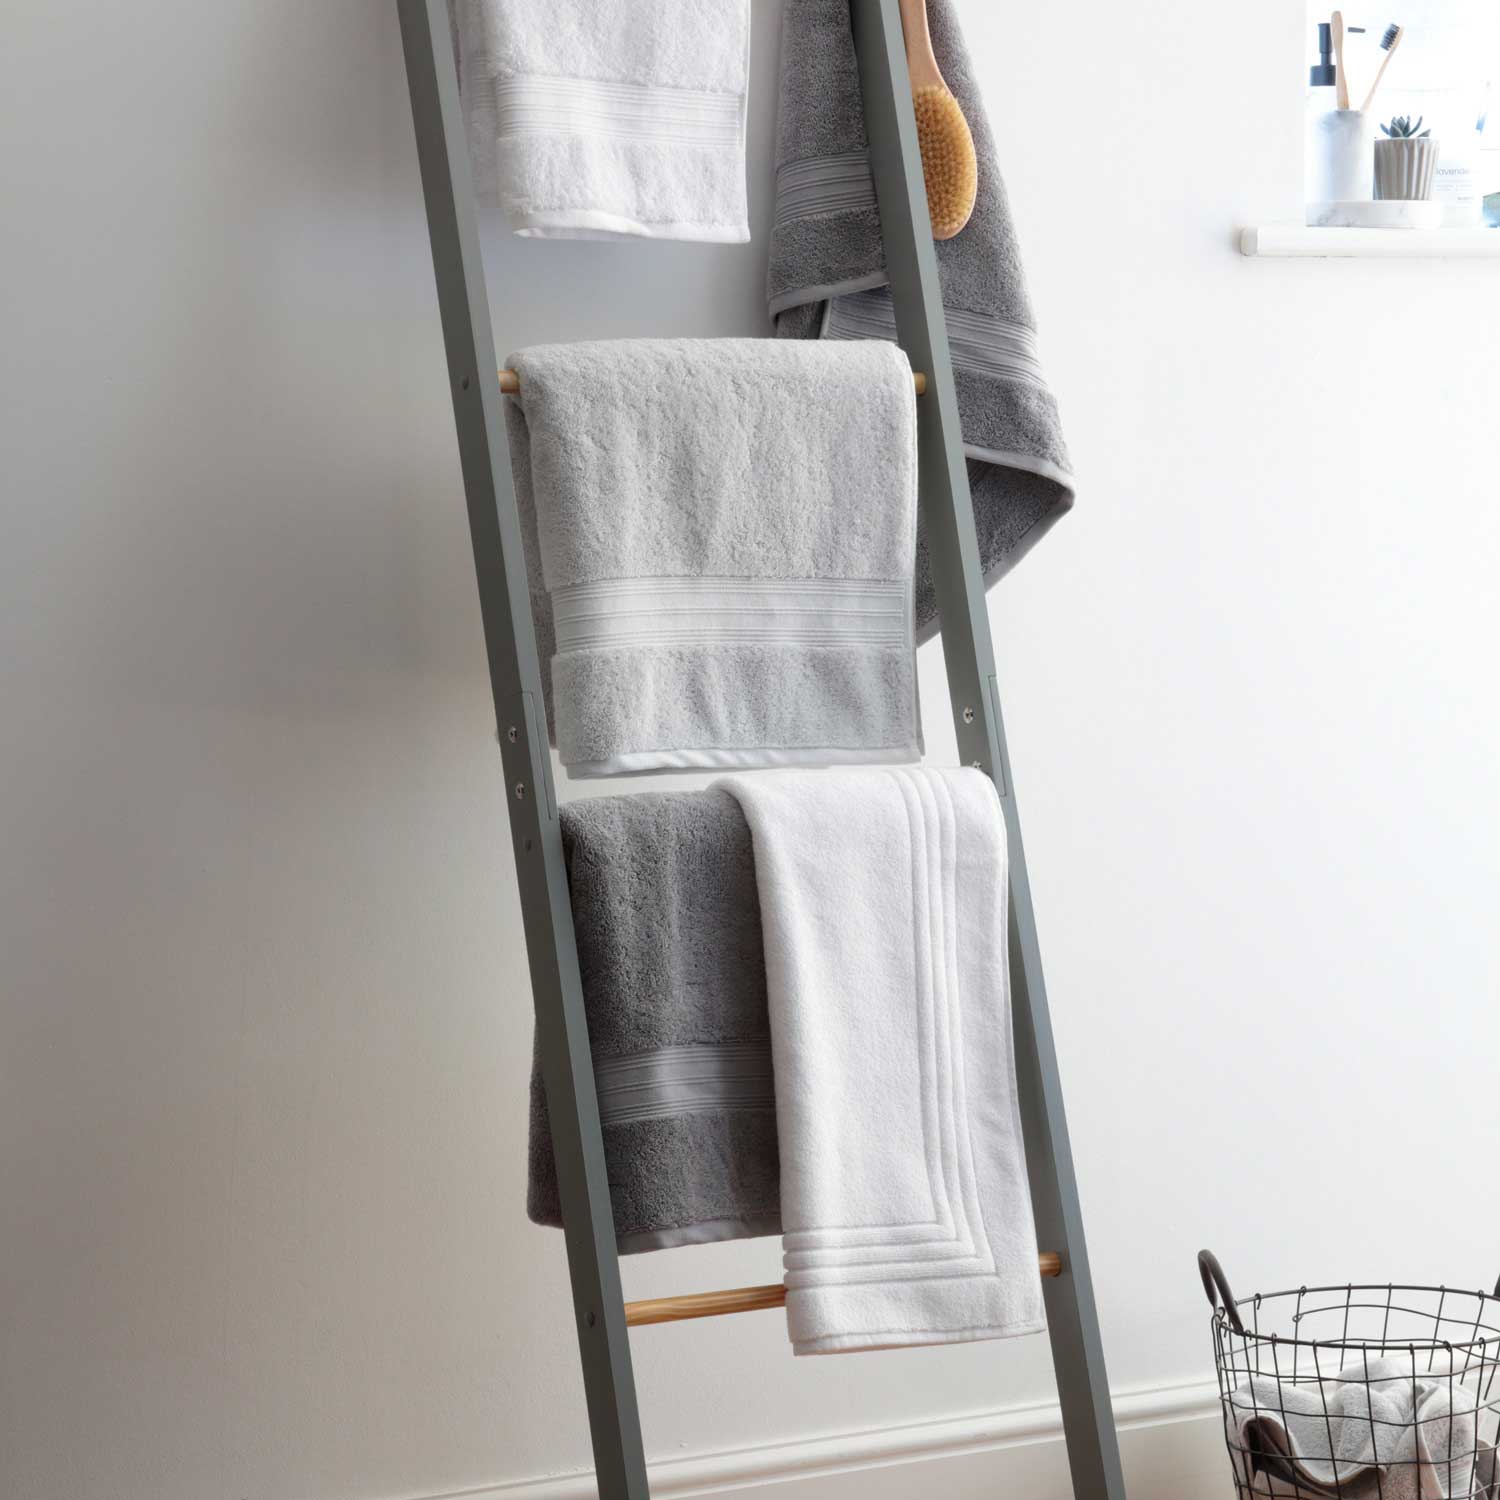 How to Wash & Dry Towels to Keep Them Soft